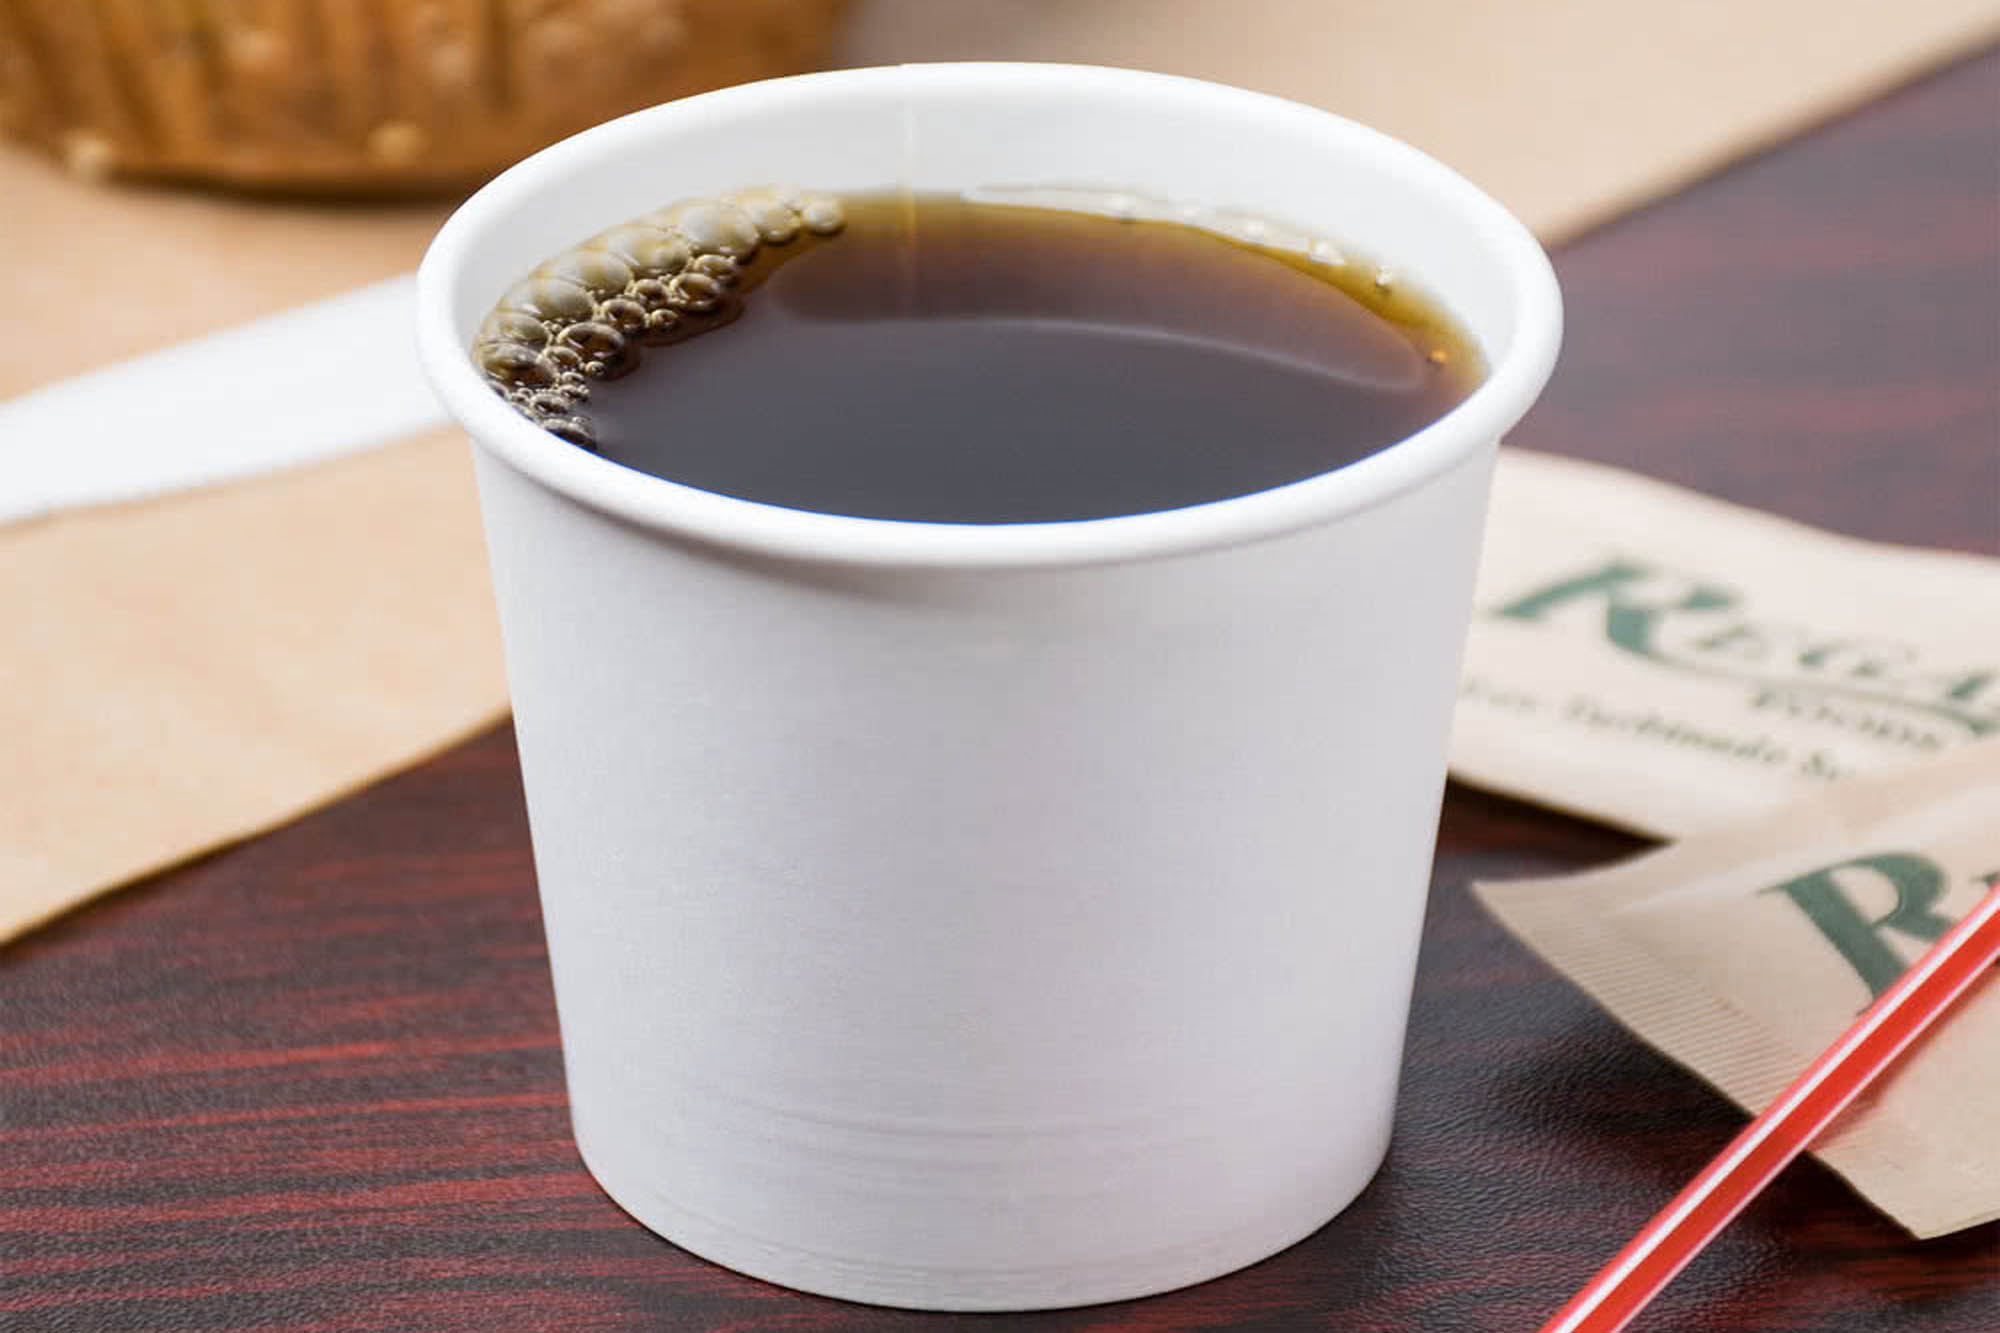 White paper coffee cups